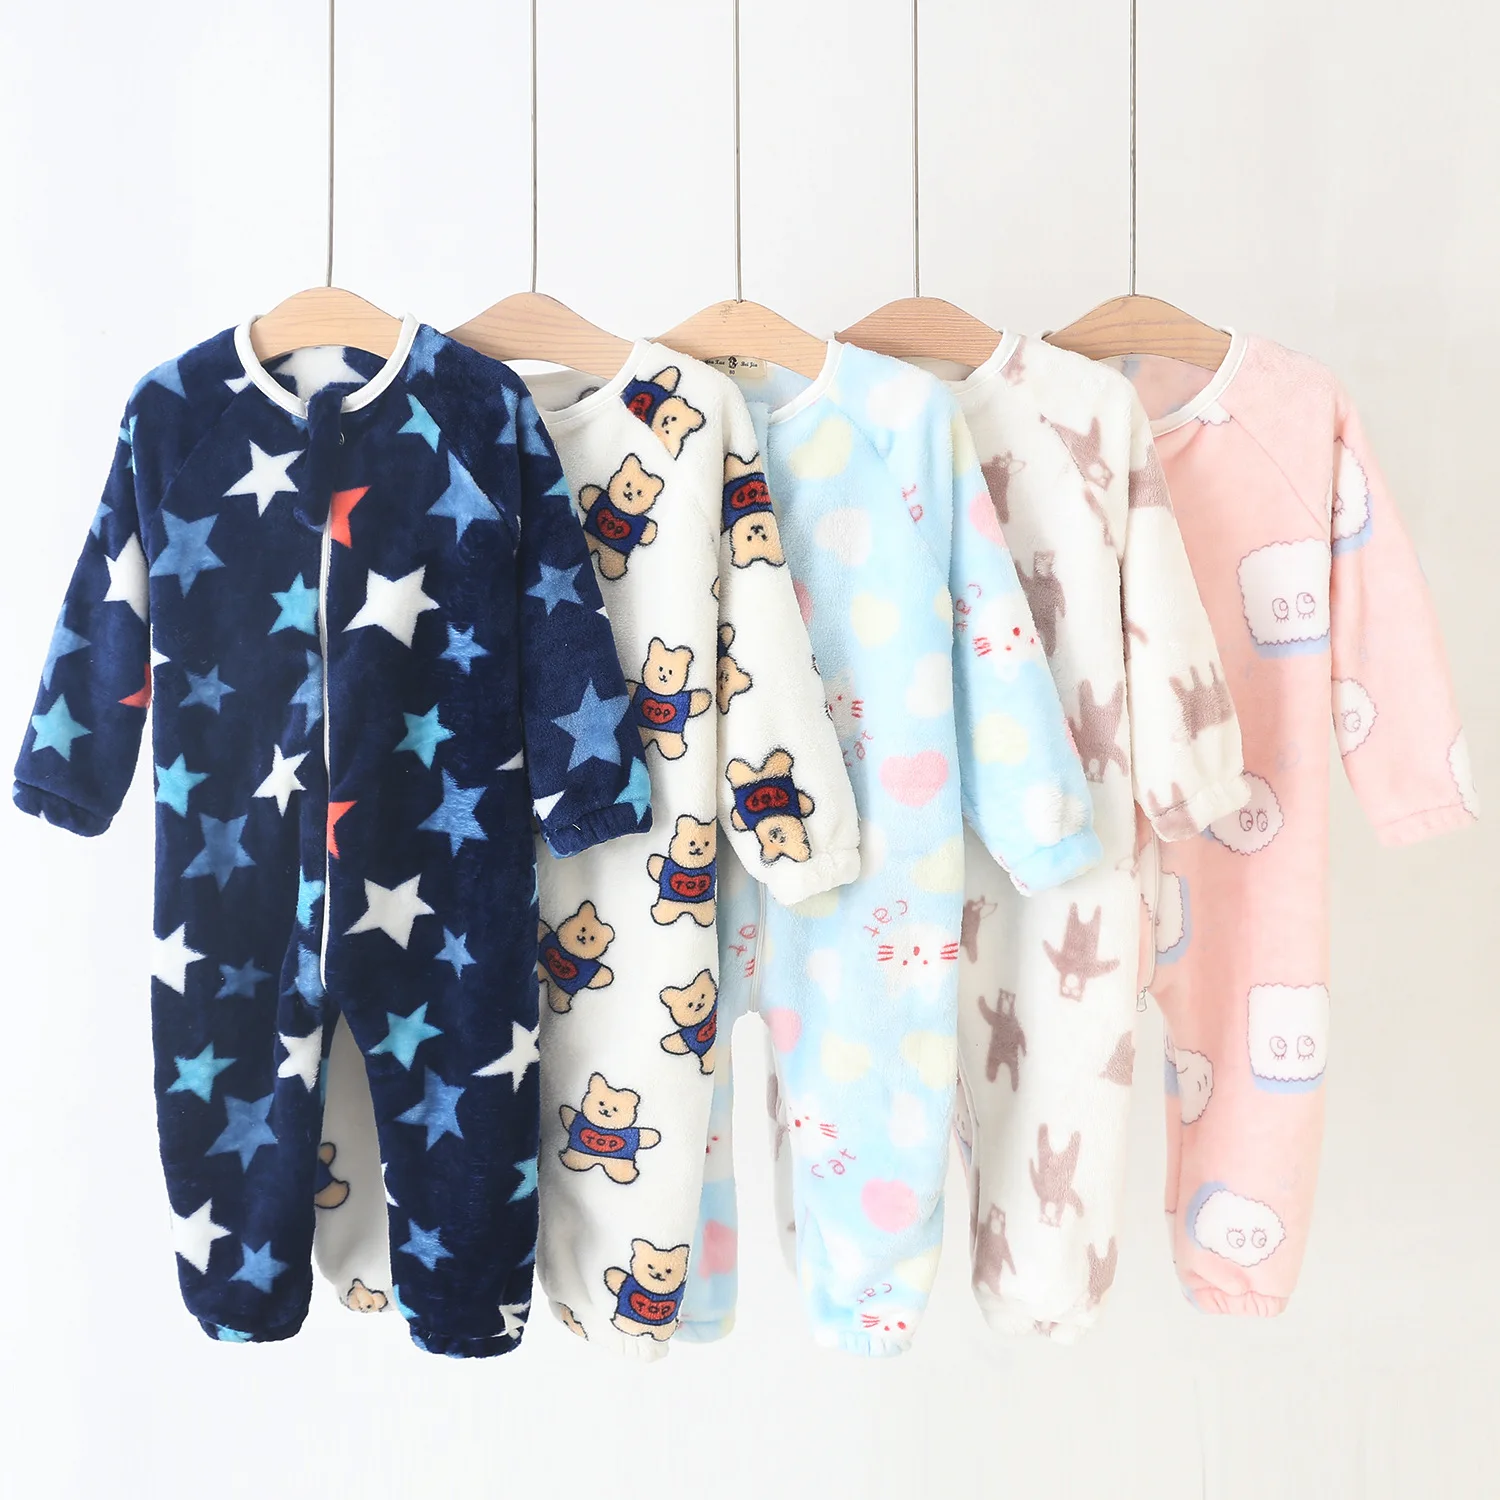 

1 to 5 Years Winter Flannel Childrens Pajamas Sleeping Bags Rompers for Boys and Girls One-piece Suits for Home Wear